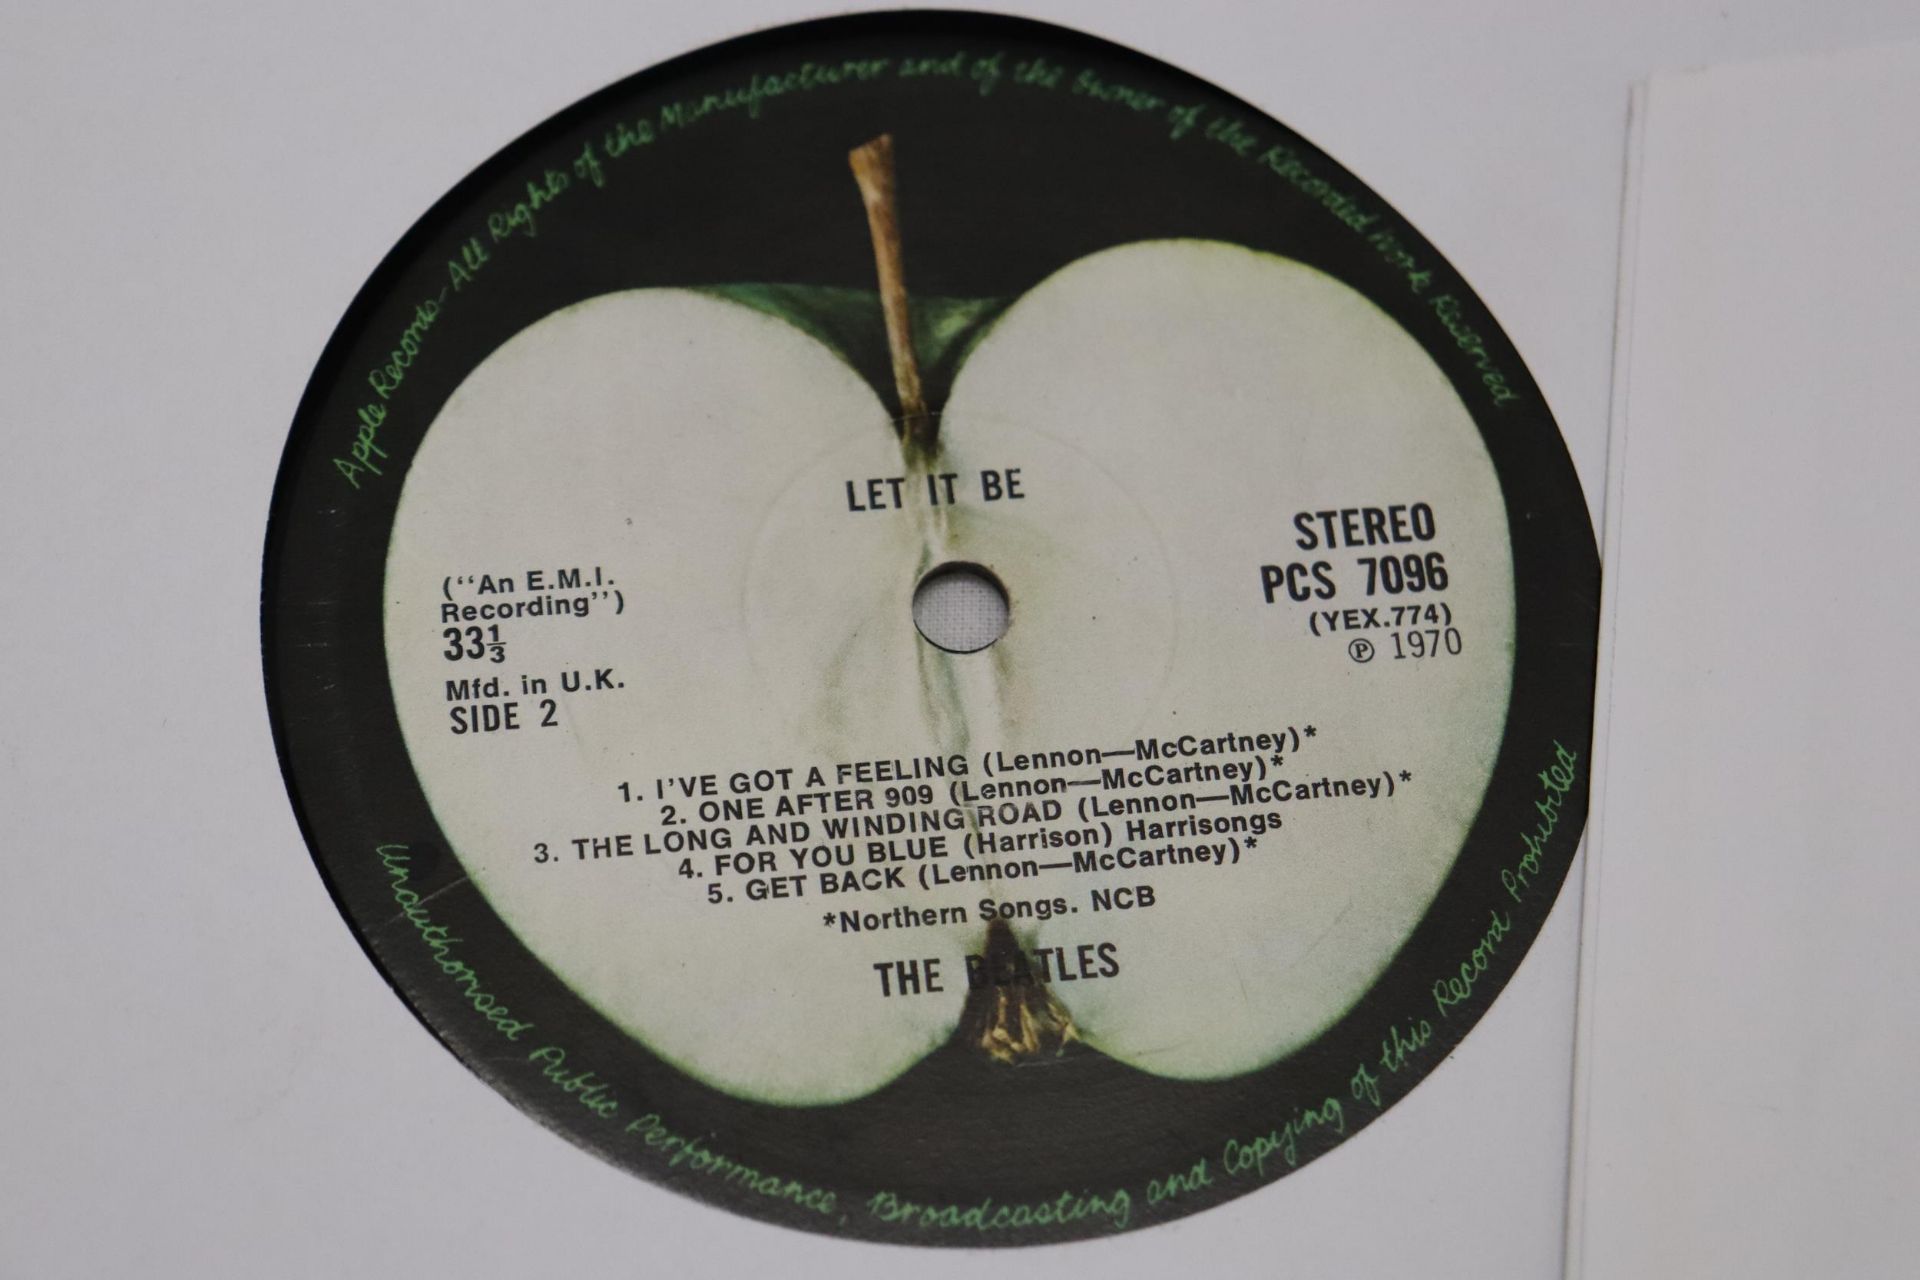 TWO BEATLES LP'S - LET IT BE (1970) AND THE BEATLES (1968) (NO COVERS) - Bild 5 aus 7